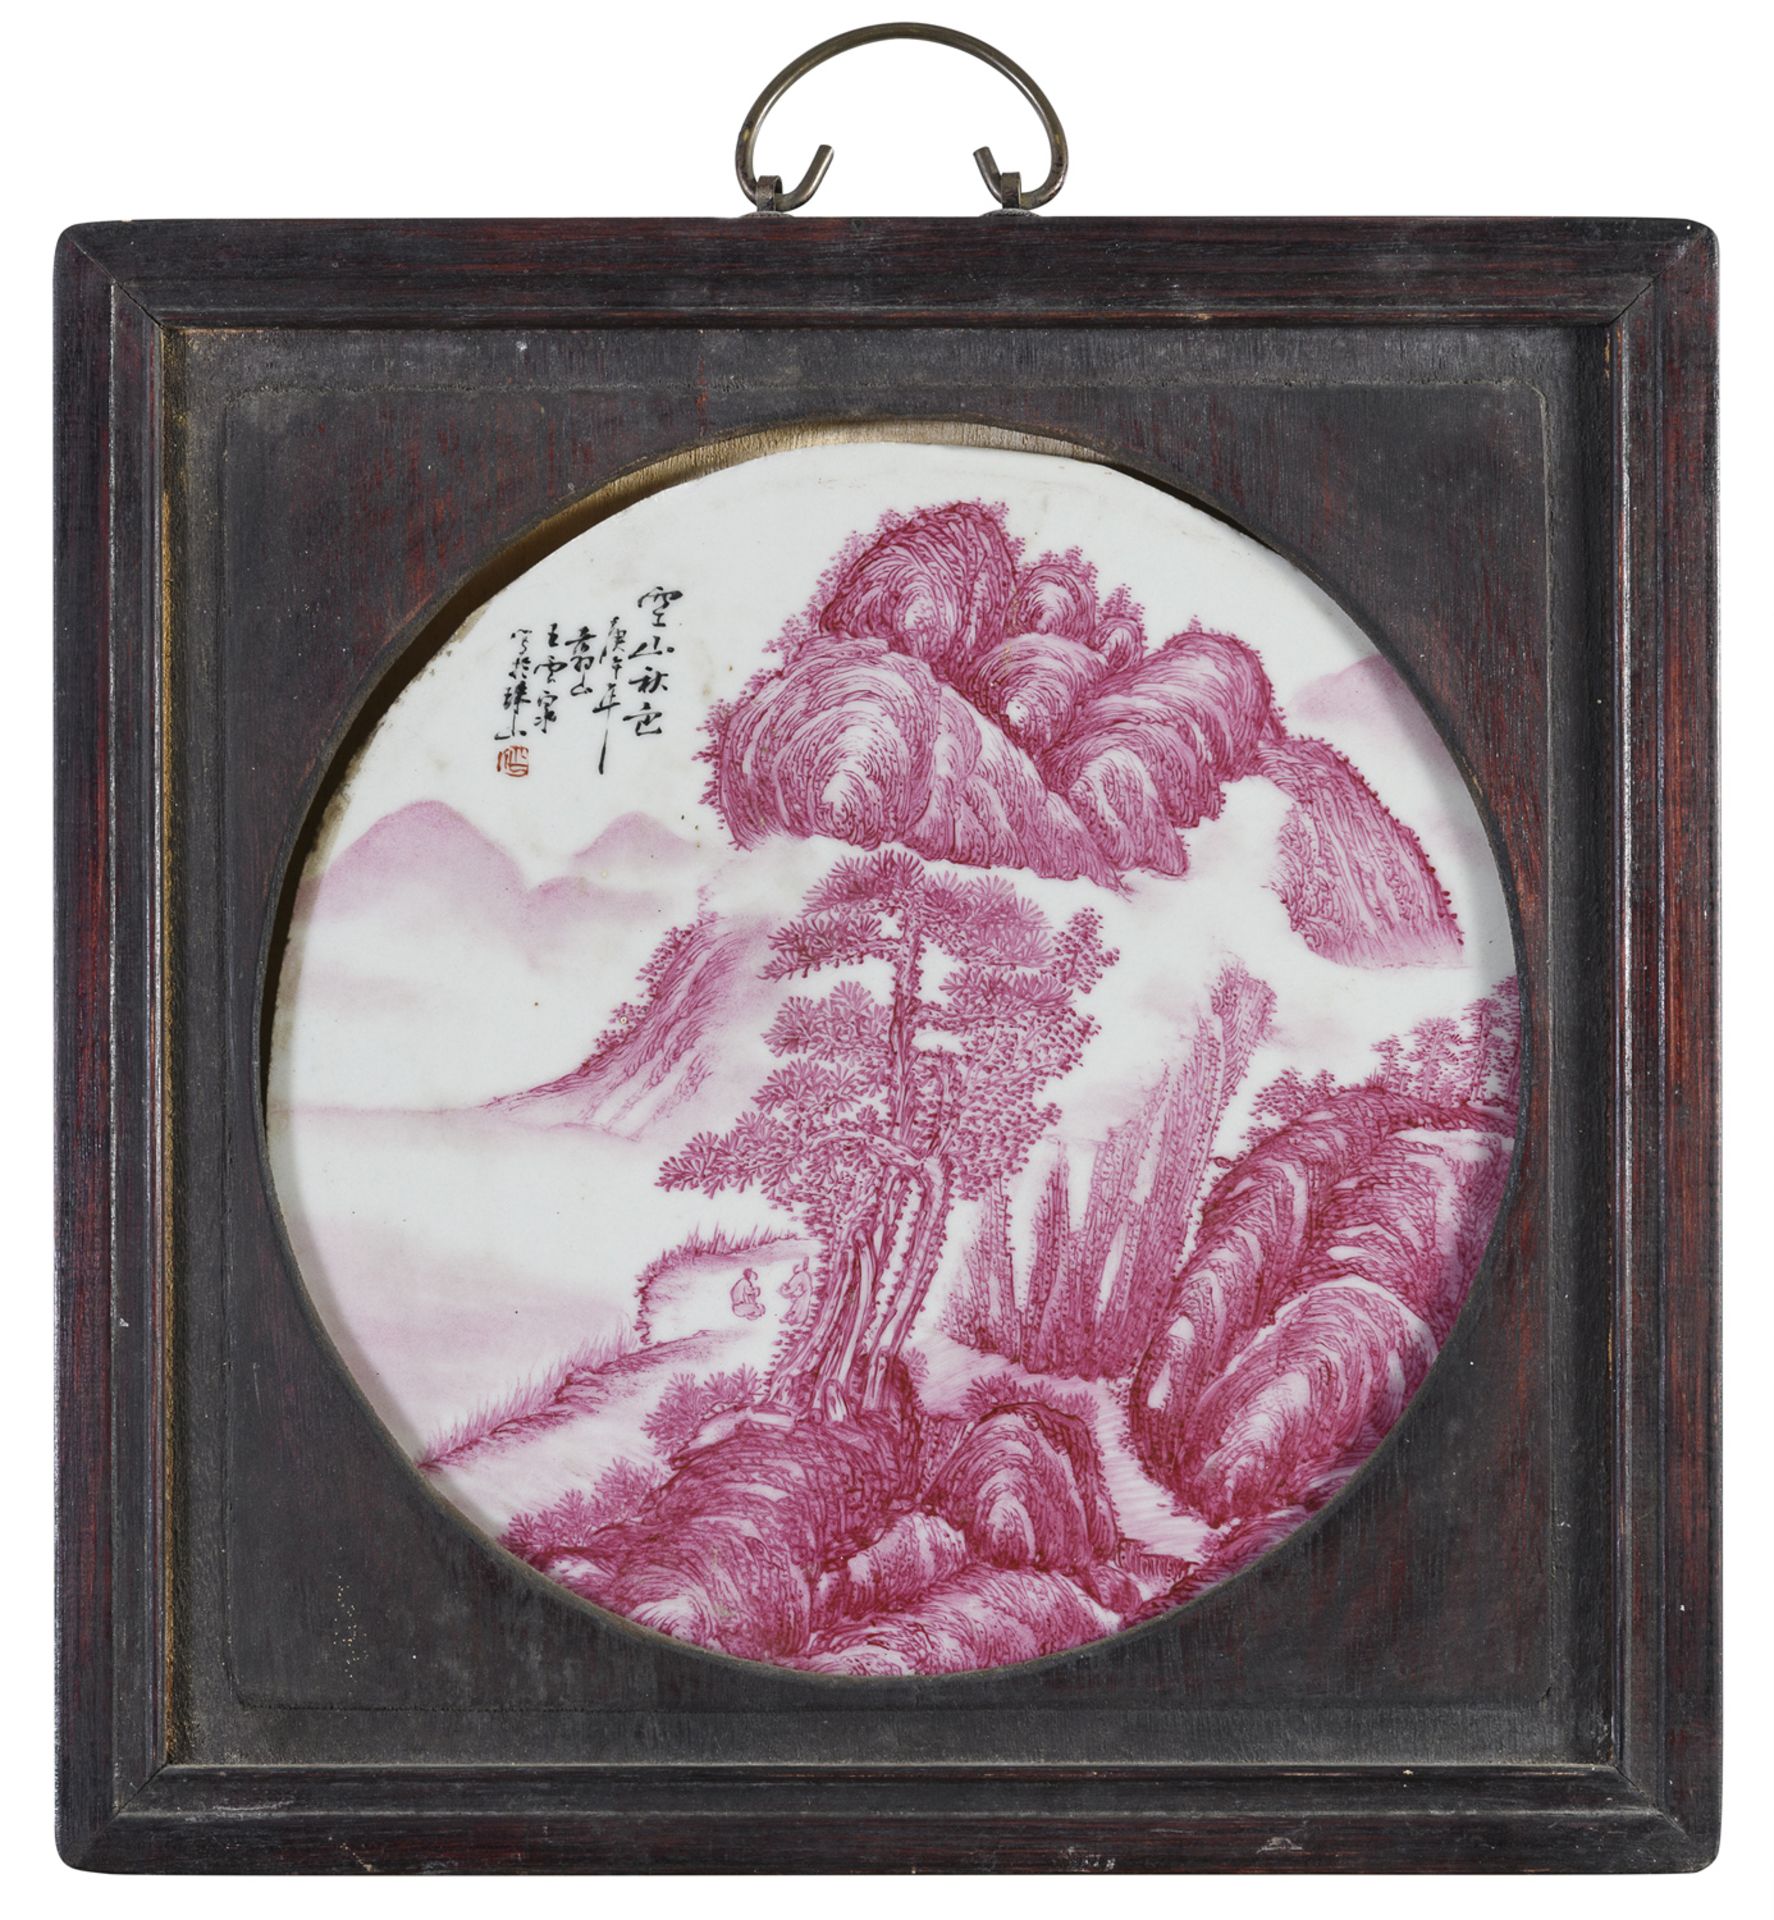 A CHINESE PORCELAIN PLATE 20TH CENTURY